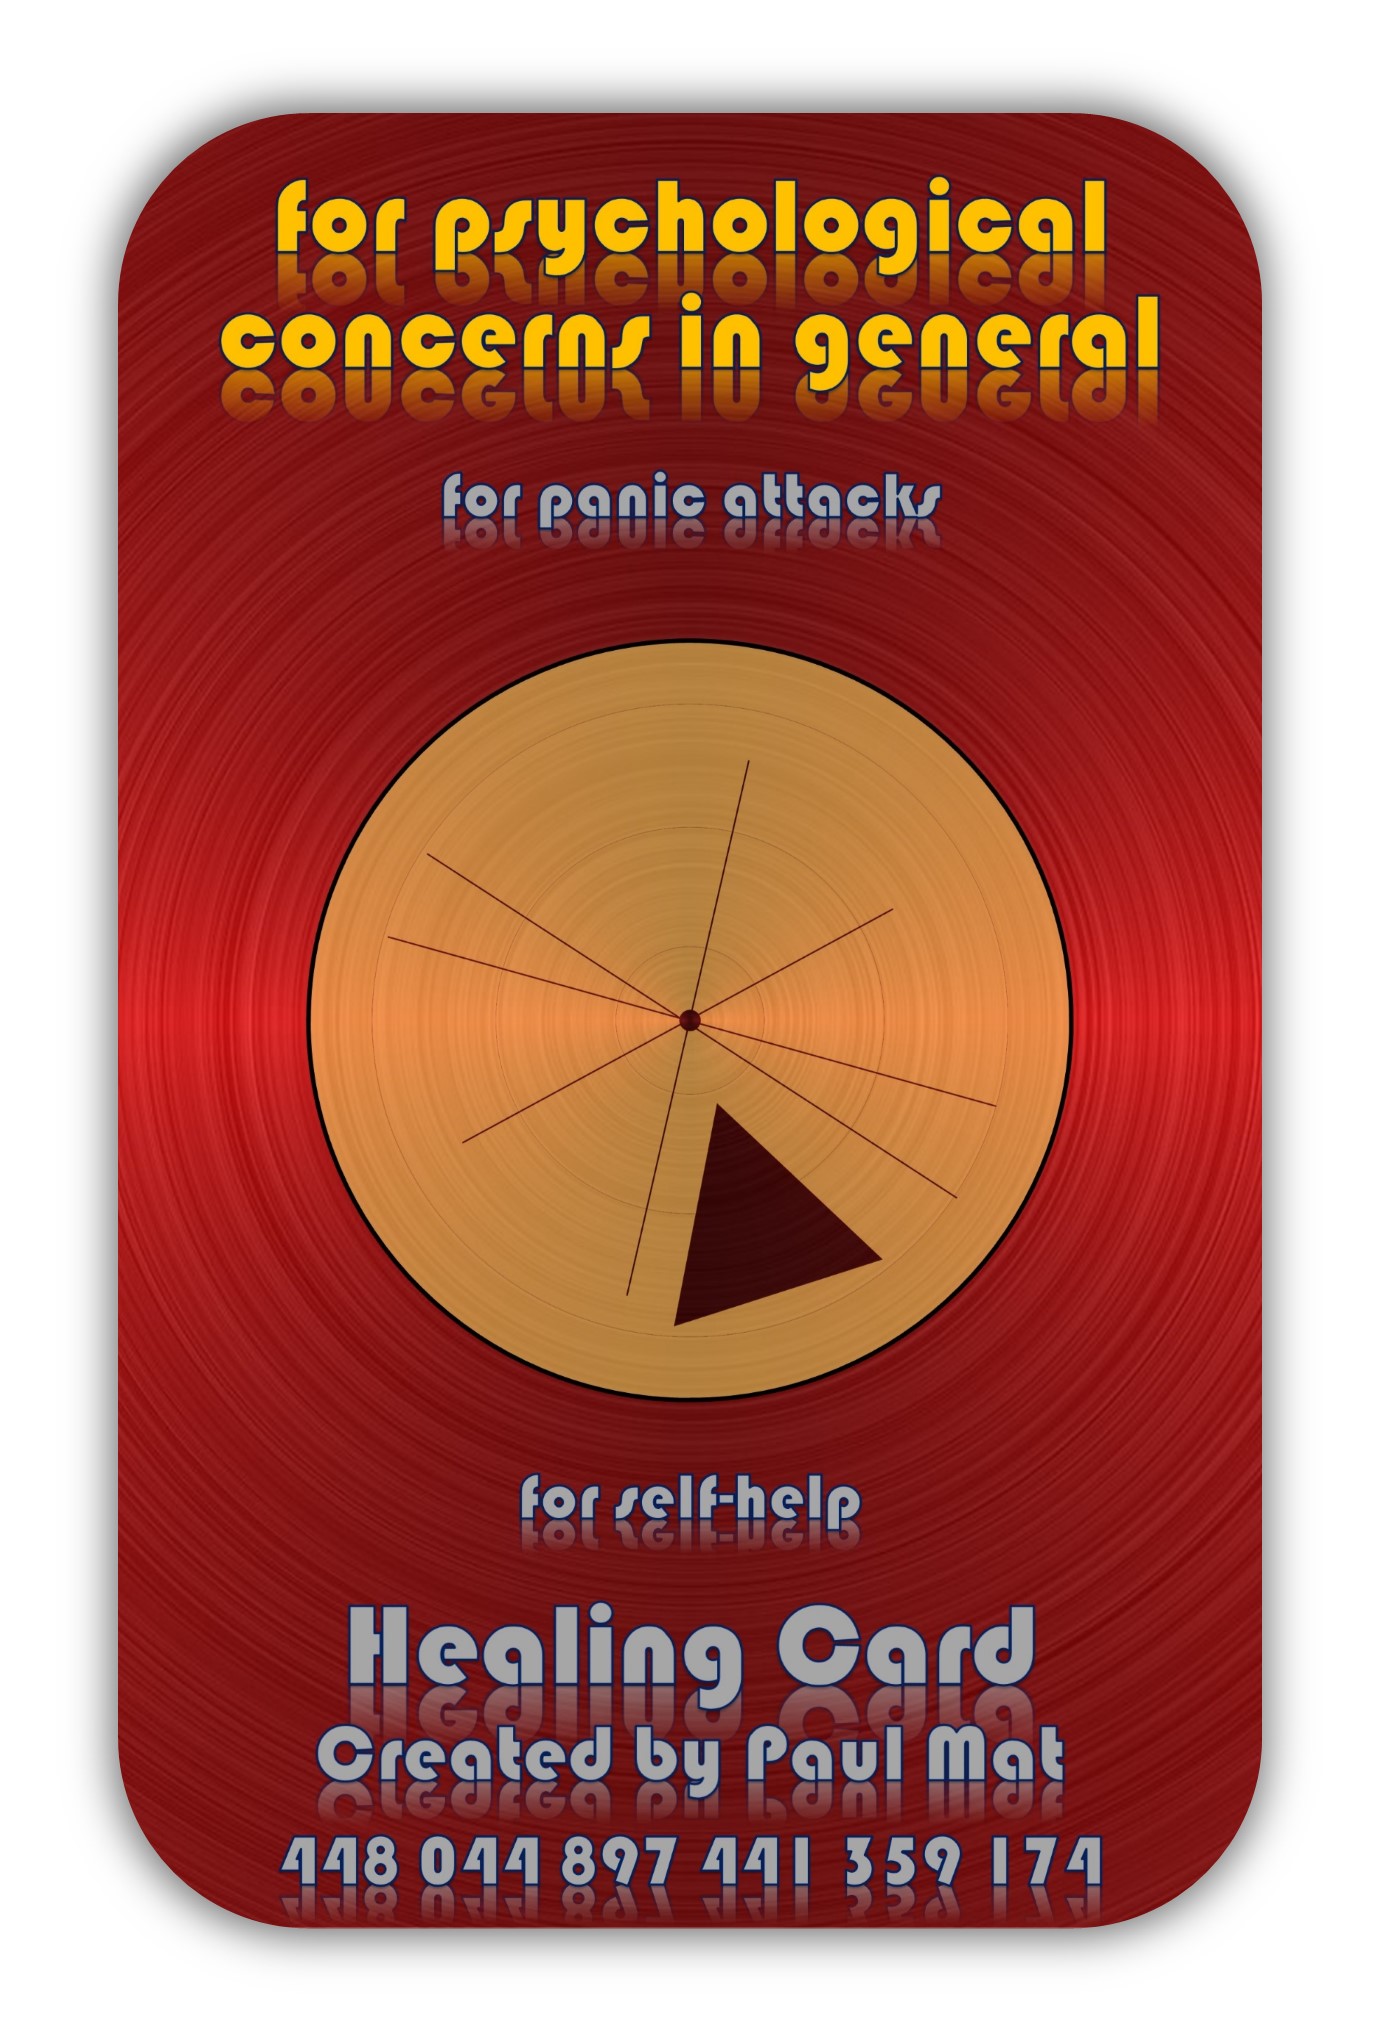 Healing Number Card with radionics barcode #174